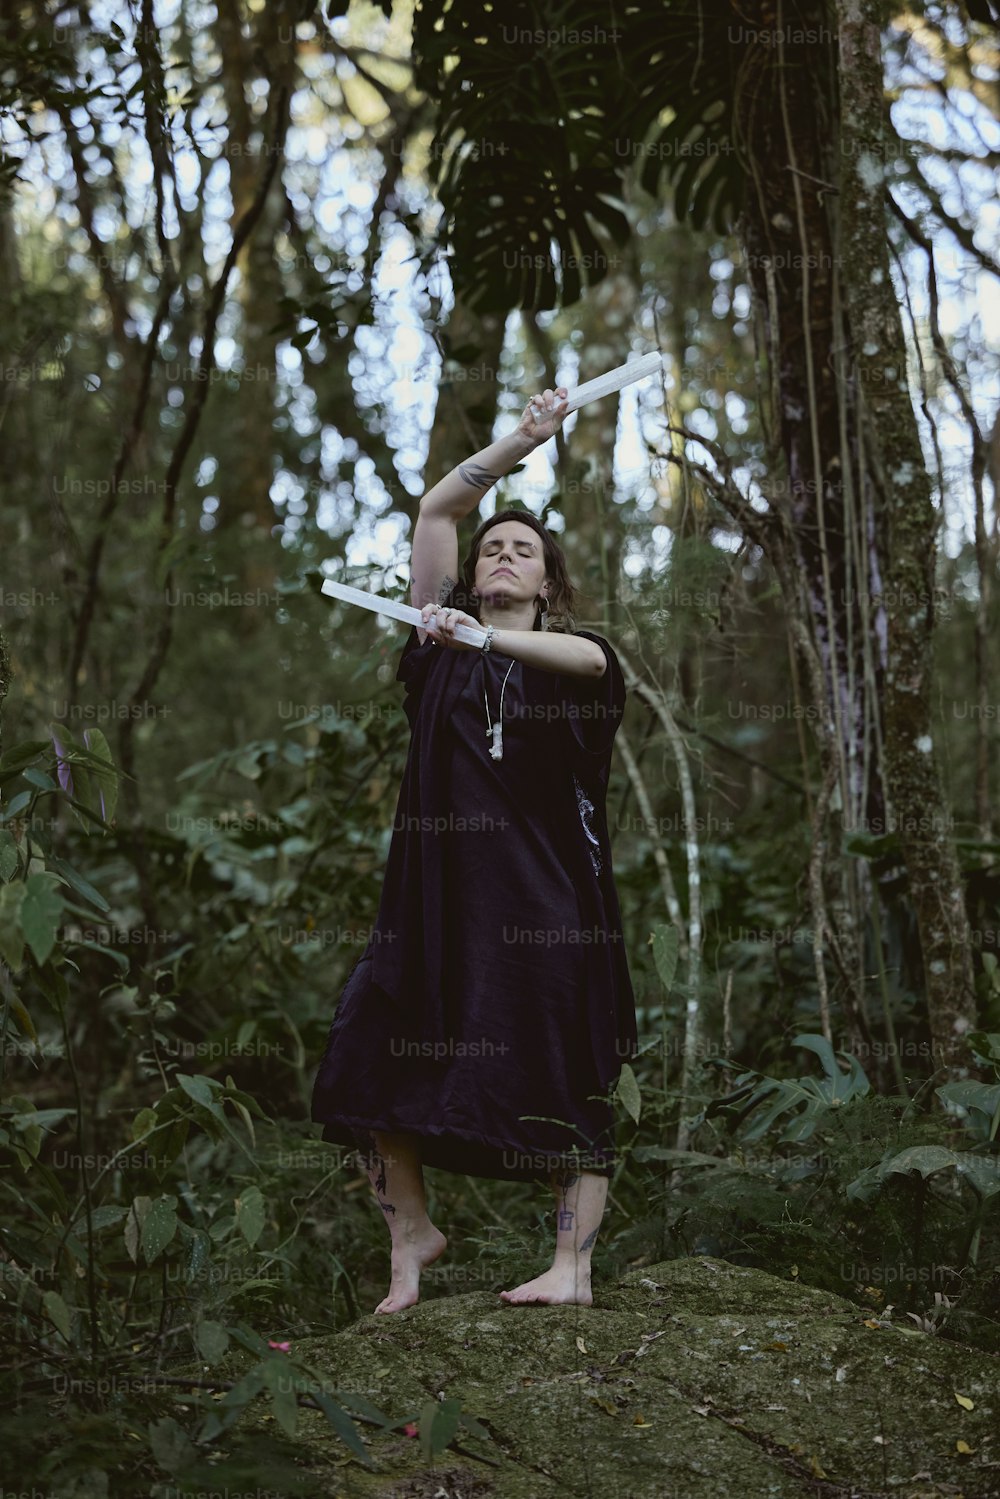 a woman in a purple dress holding a sword in a forest